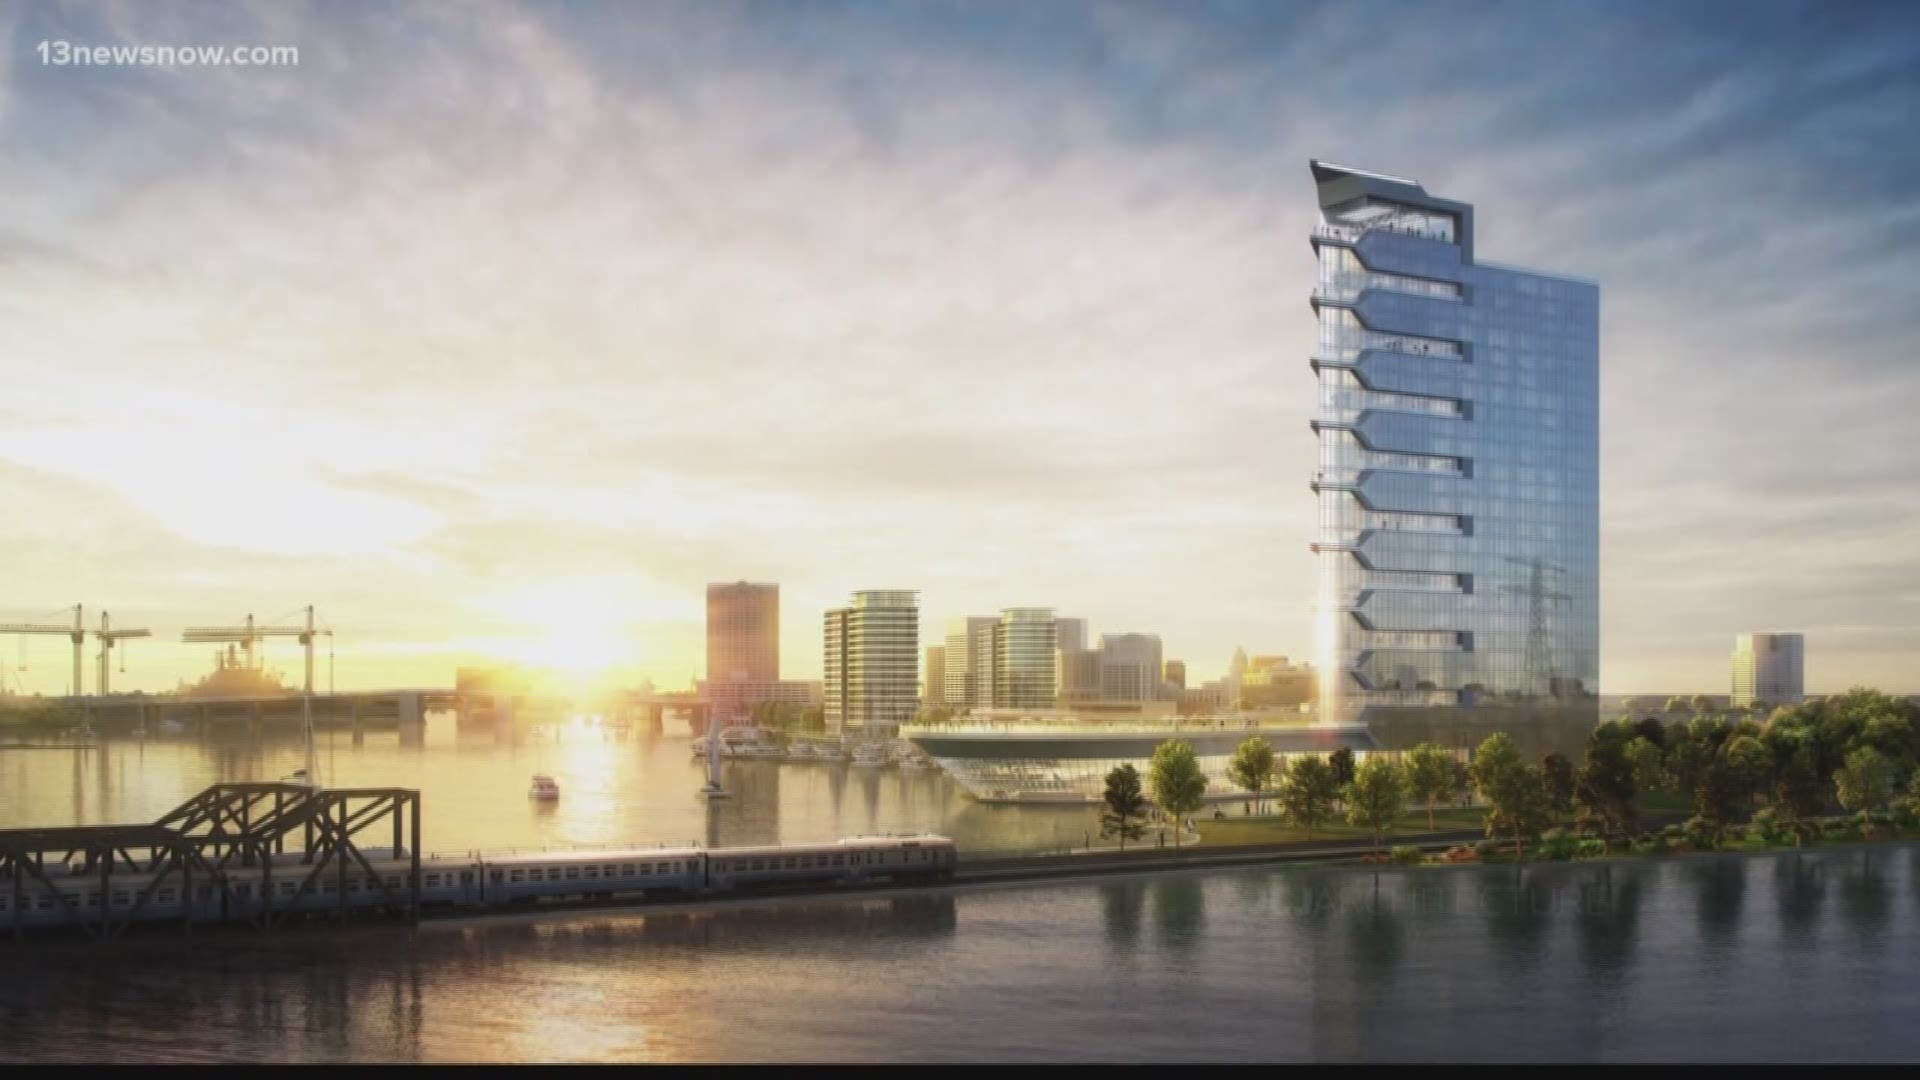 Norfolk's city council unanimously voted to support legislation for a resort casino to be built in the city.